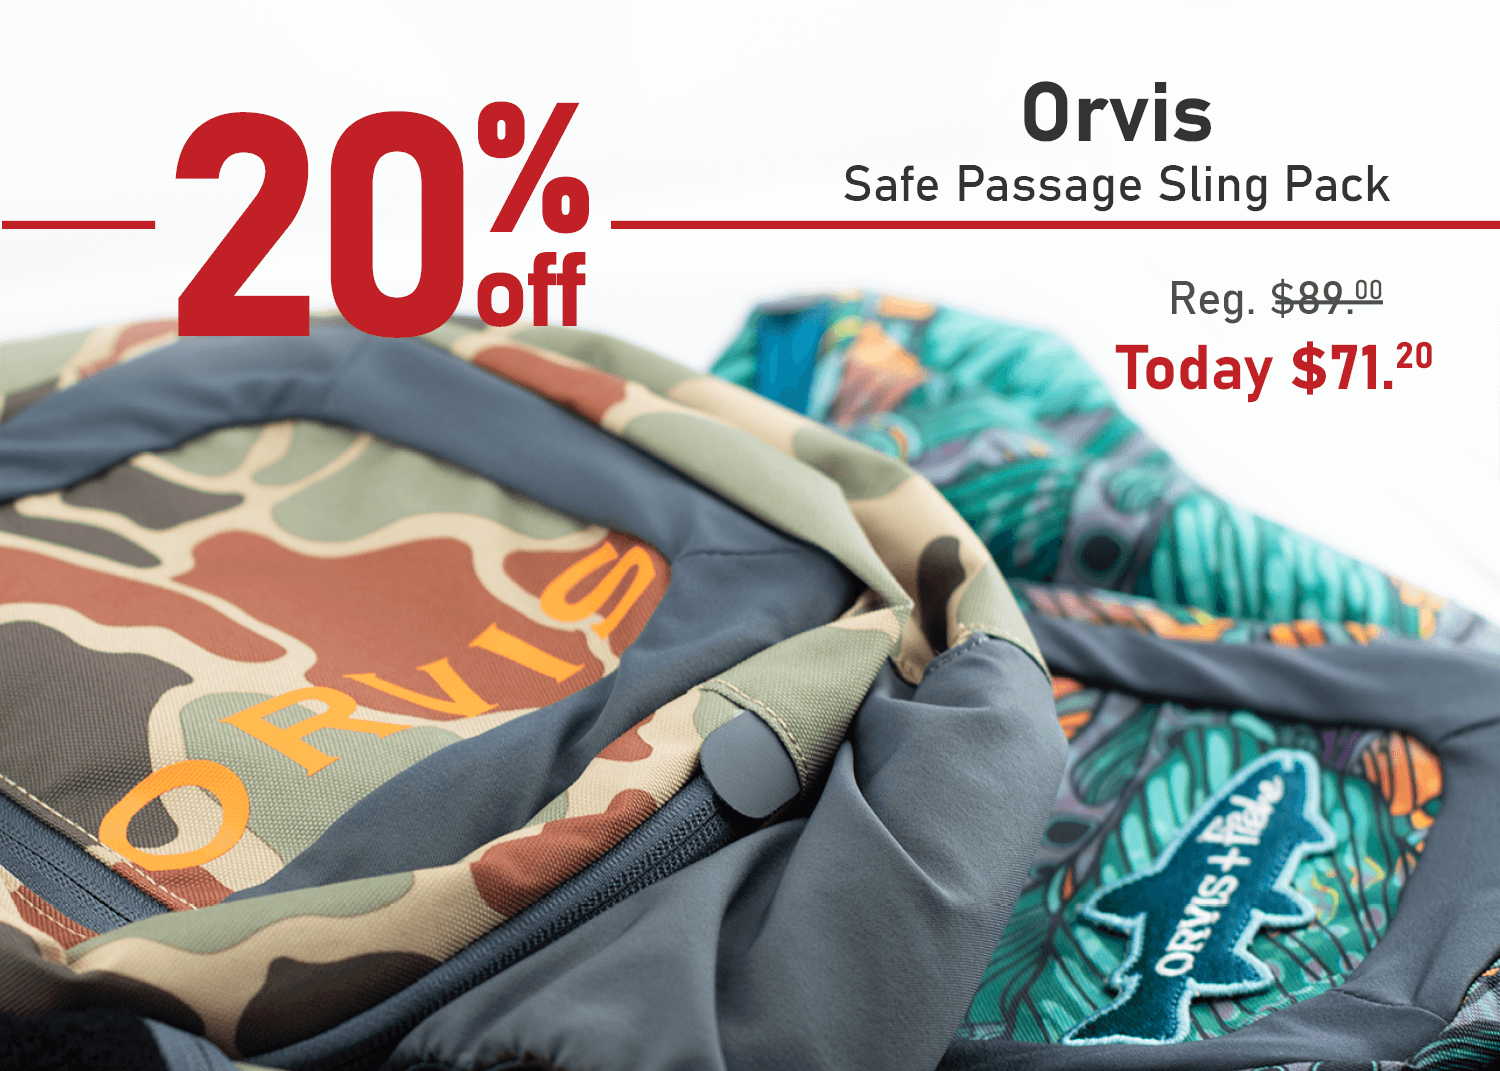 Save 20% on the Orvis Safe Passage Sling Pack